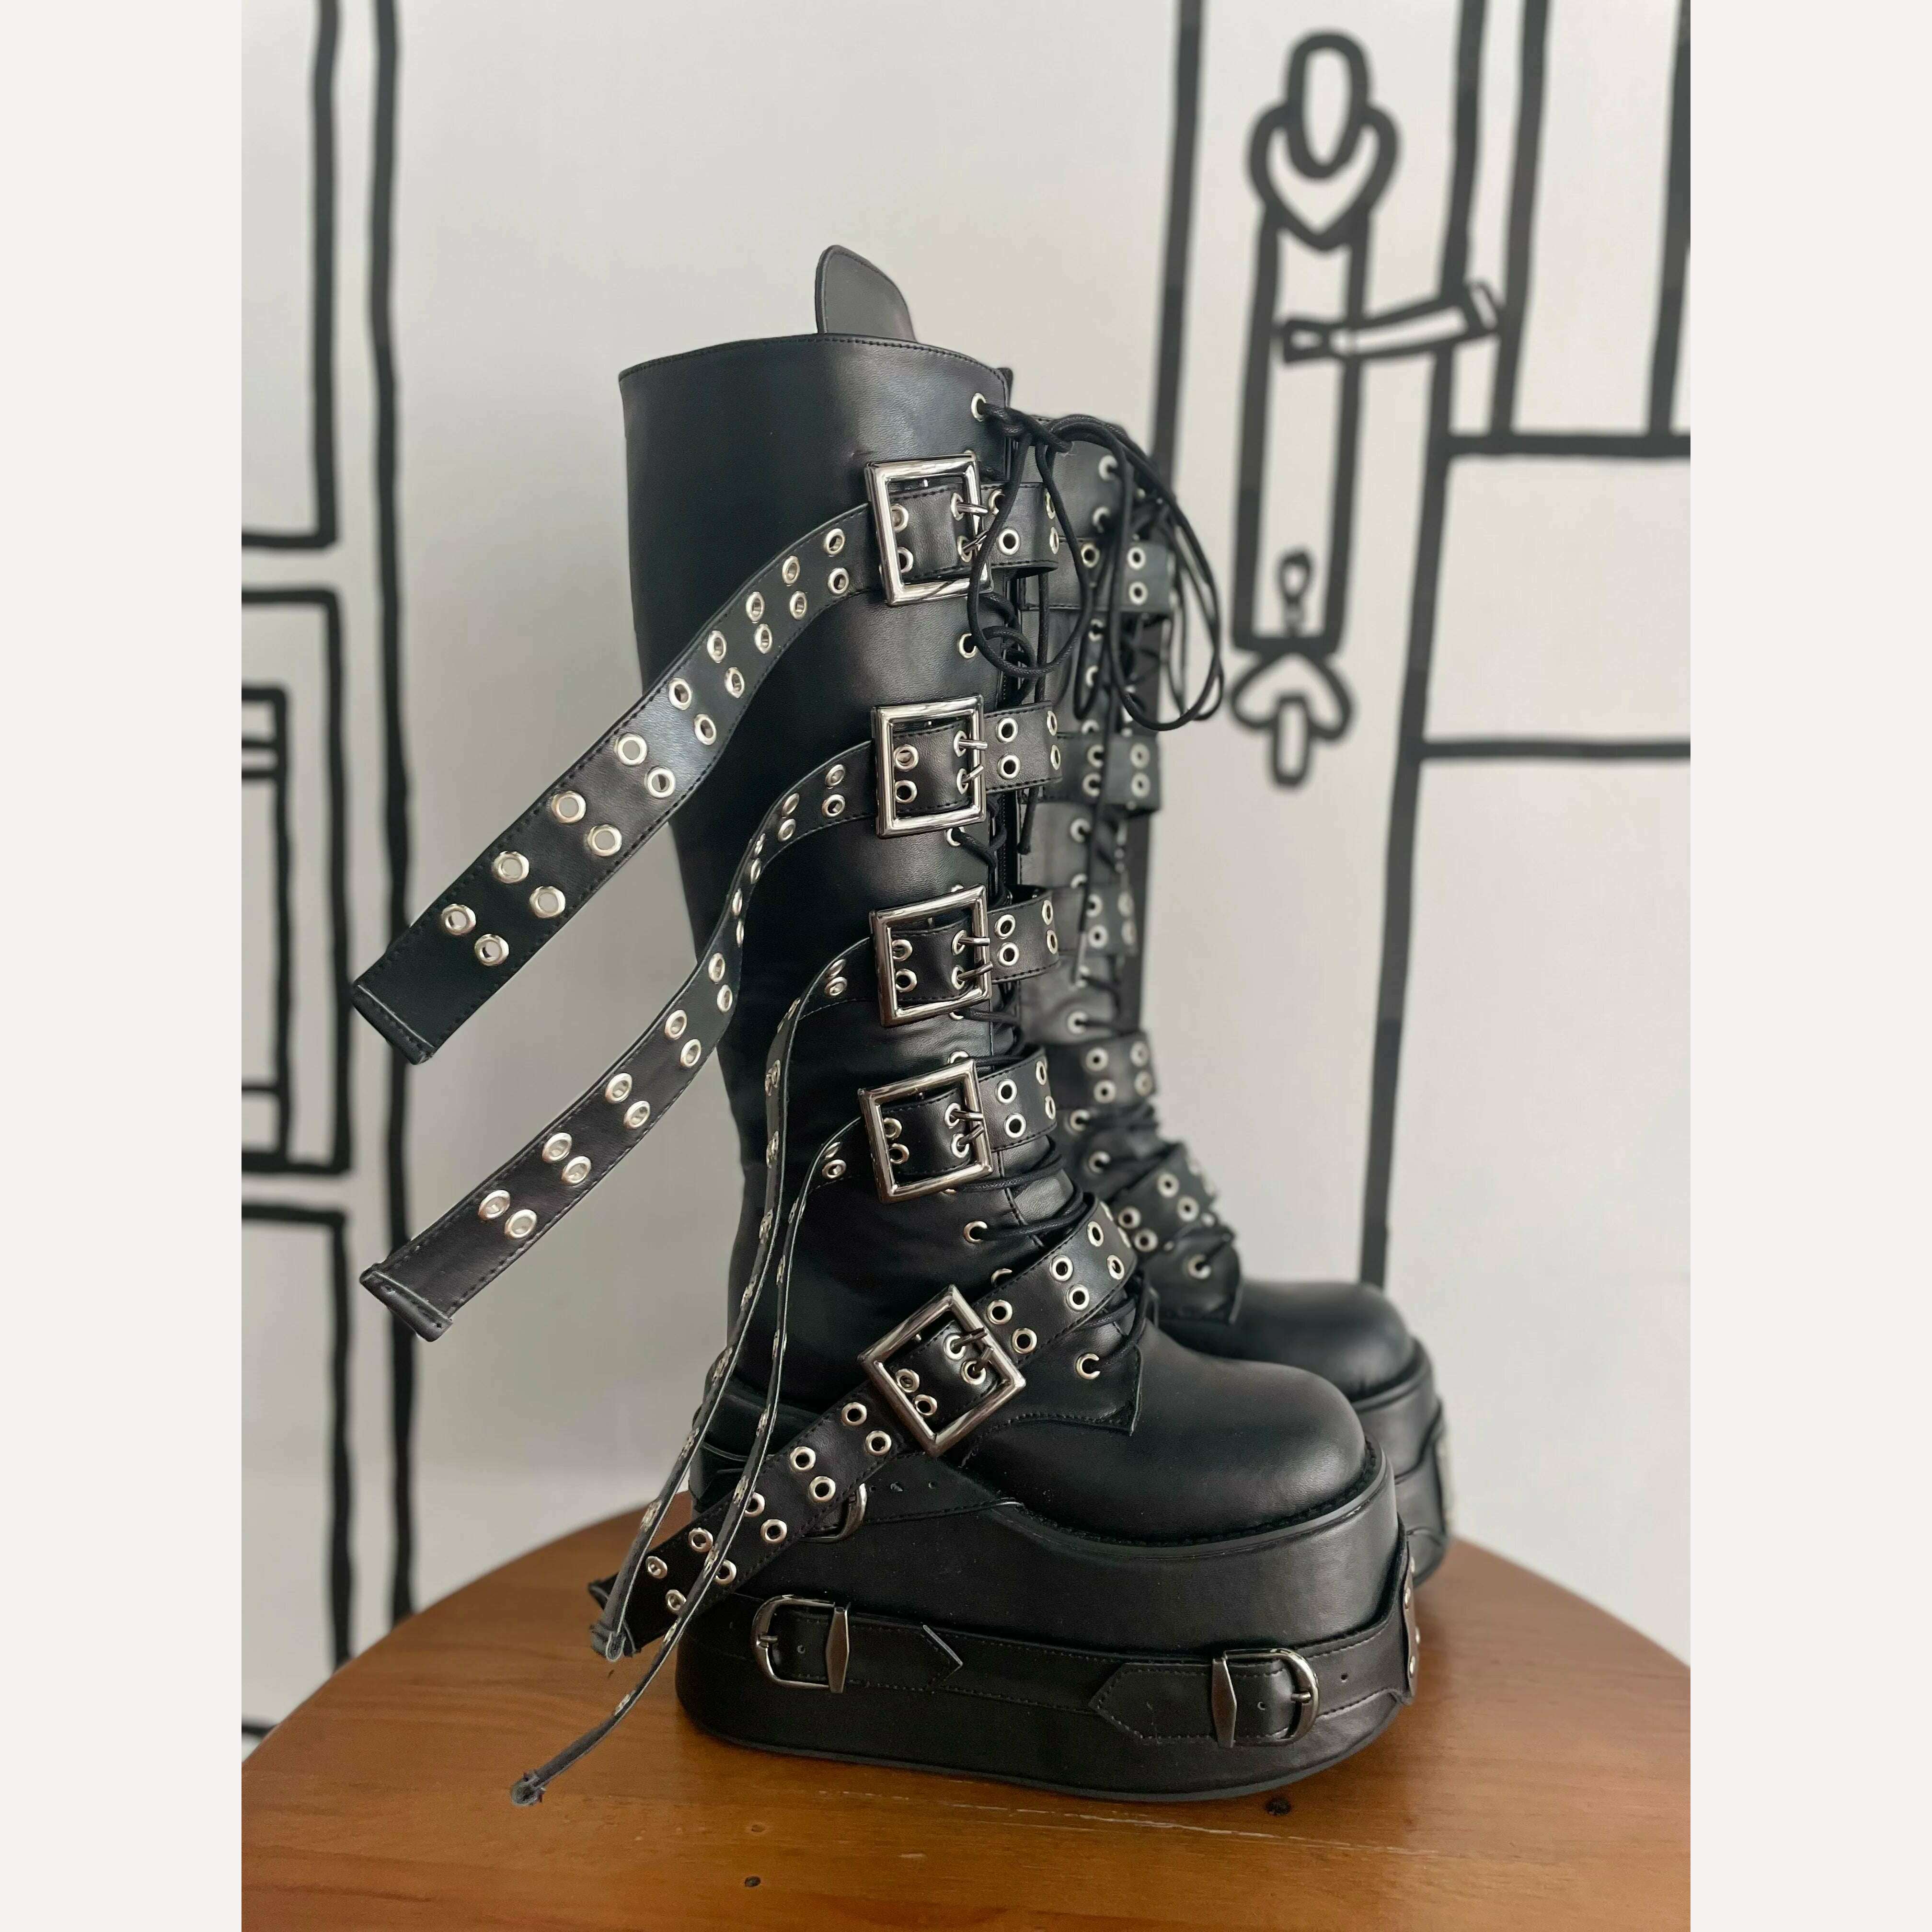 KIMLUD, Punk Platform Knee-high boots Long Belt Buckle High Heels Wedges Metal Sheet Round Toe Lace Up Zip Boots Woman Man Gothic Shoes, KIMLUD Women's Clothes